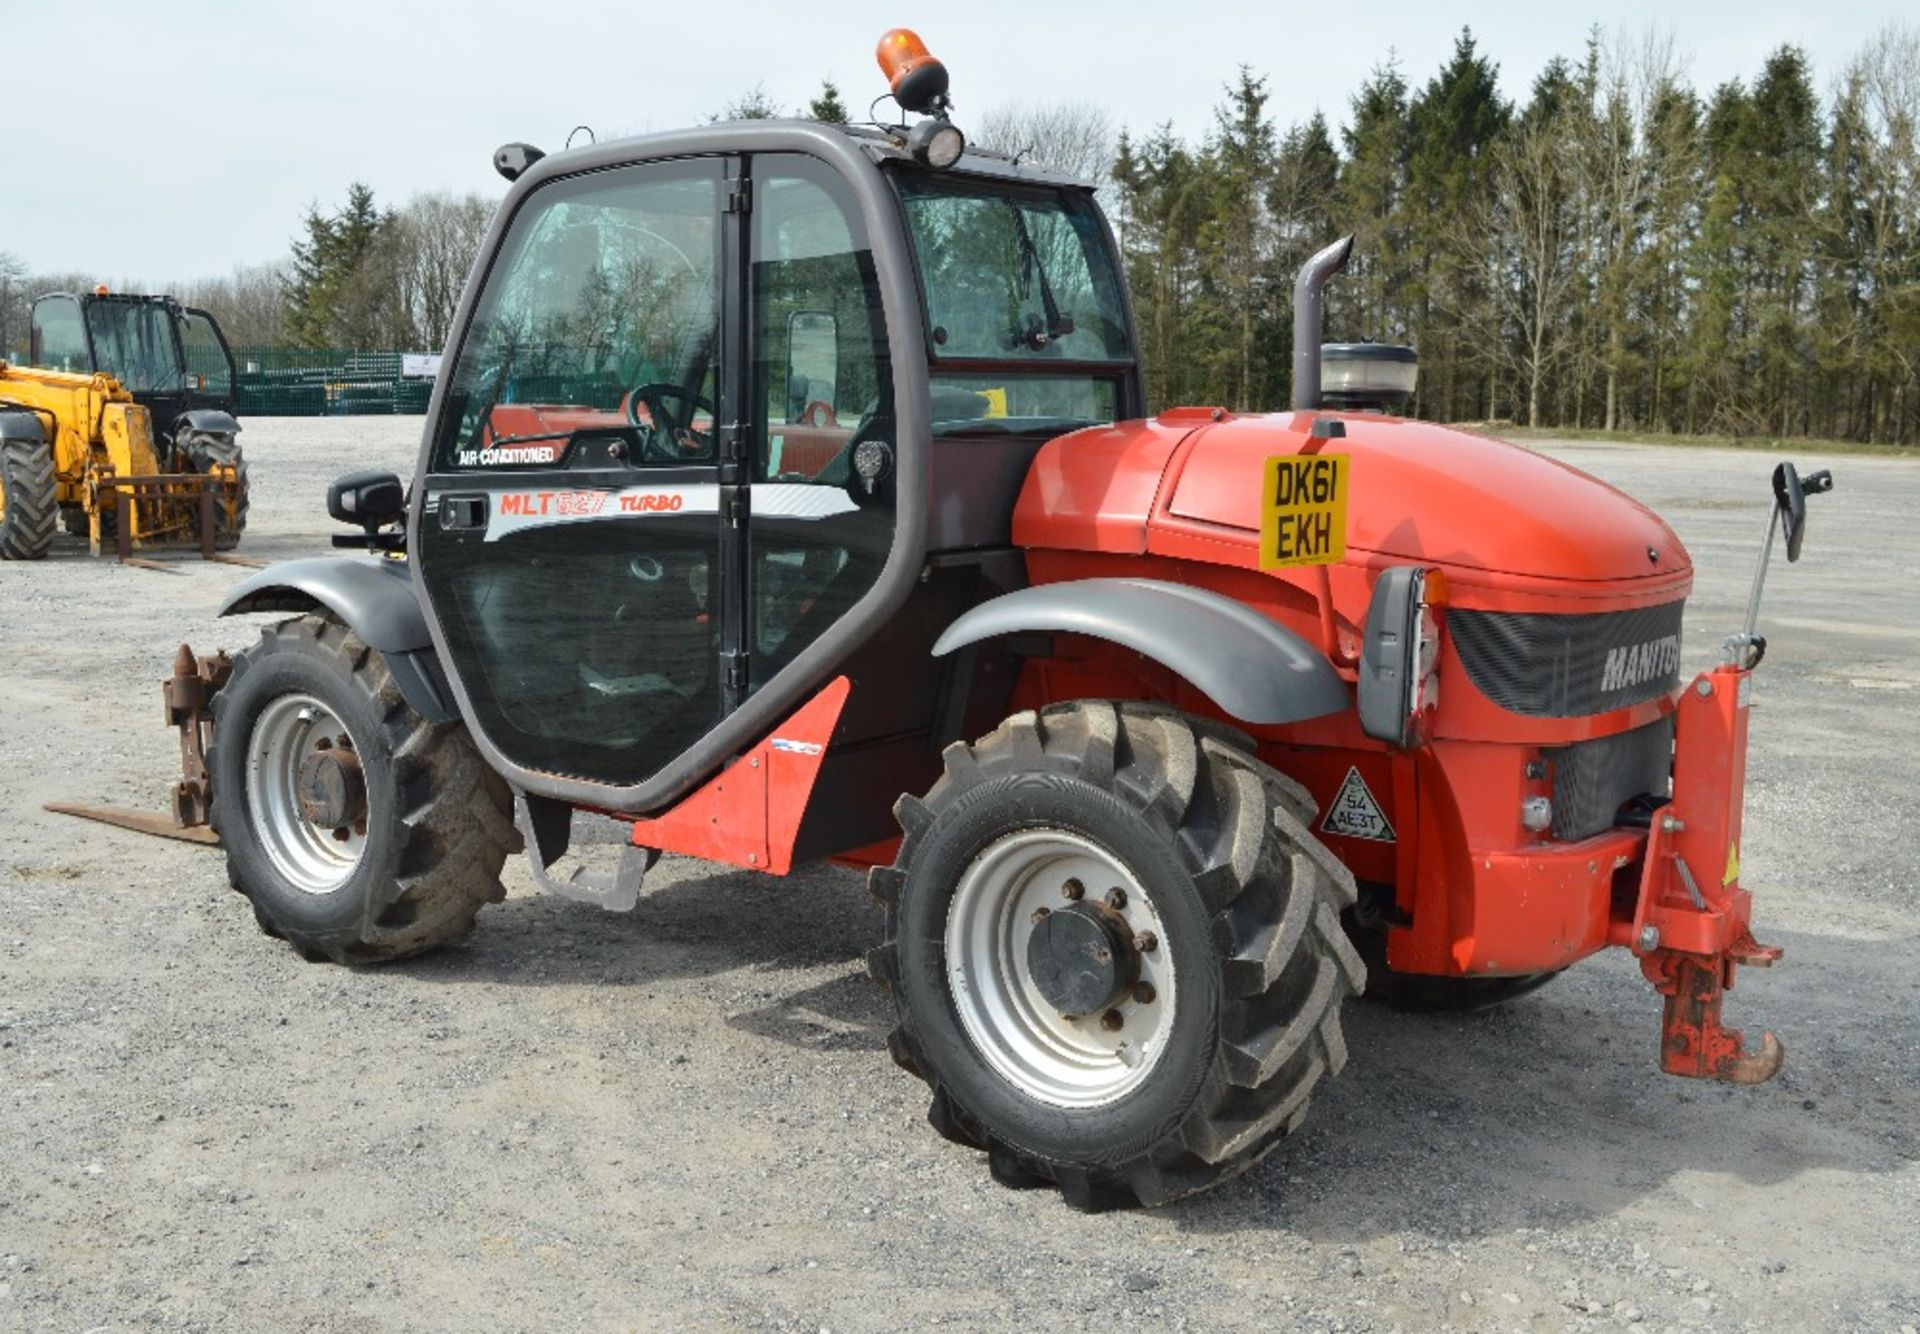 Manitou MLT 627 Turbo 6 metre telescopic handler
Year: 2011
S/N: 904615
Recorded hours: 3600 - Image 3 of 12